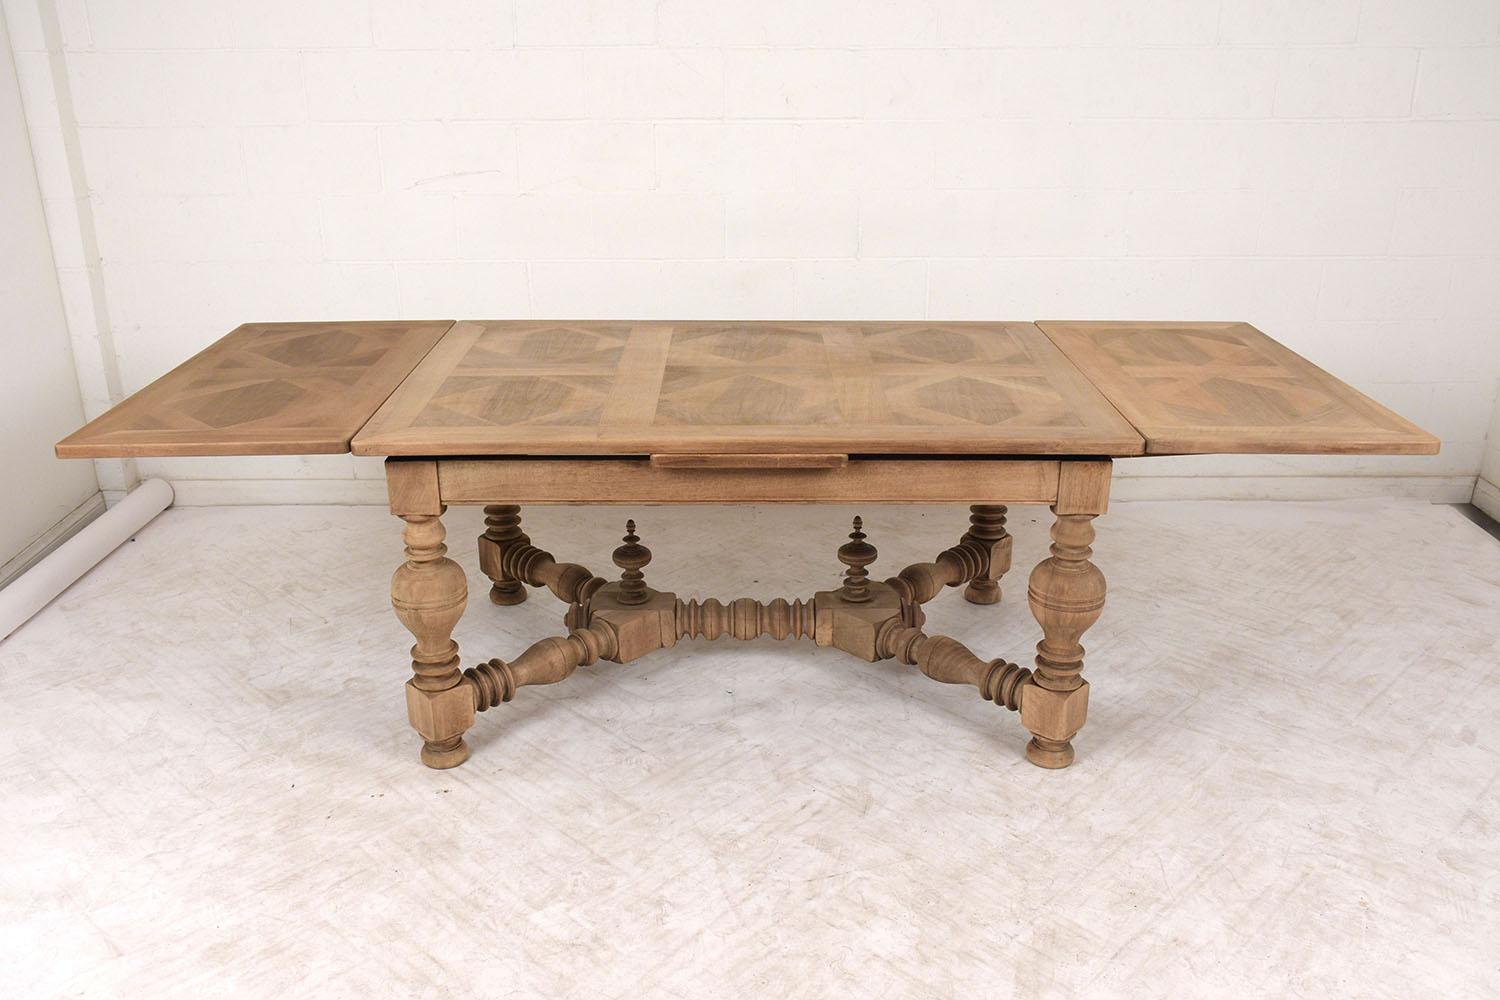 This 1890’s French Renaissance Dining Table is made out of walnut wood, has been professionally restored, and features a new bleached finish. The tabletop comes with marquetry designs and two extendable leaves underneath that pull out with ease and